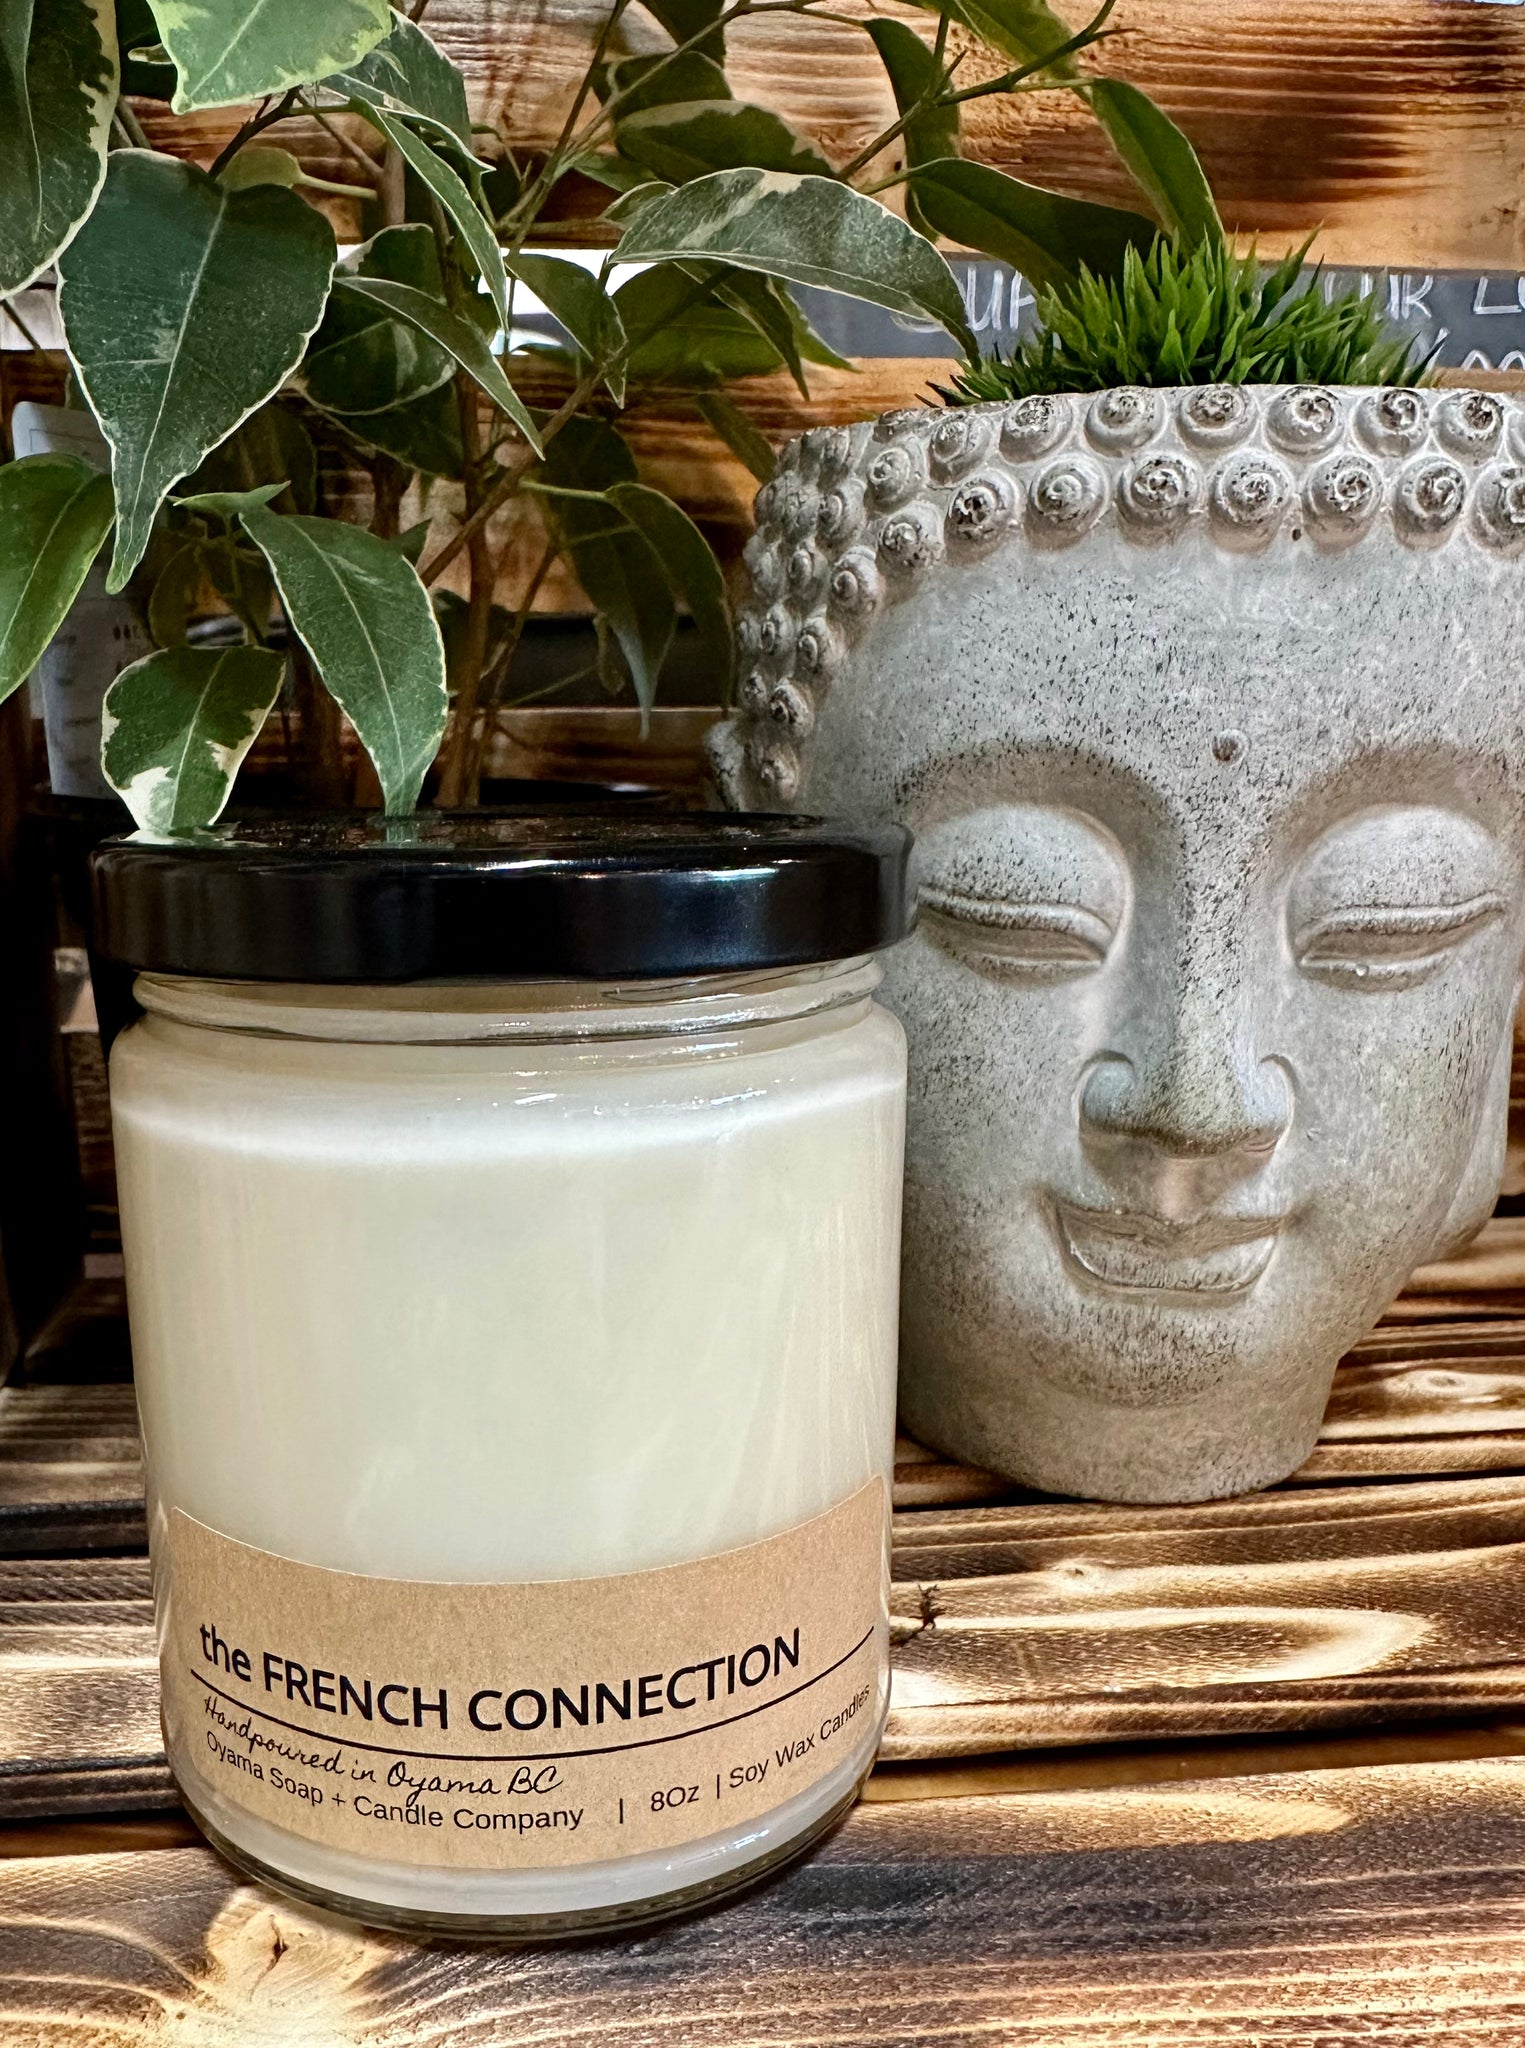 Oyama Co. - The French Connection Soy Candle